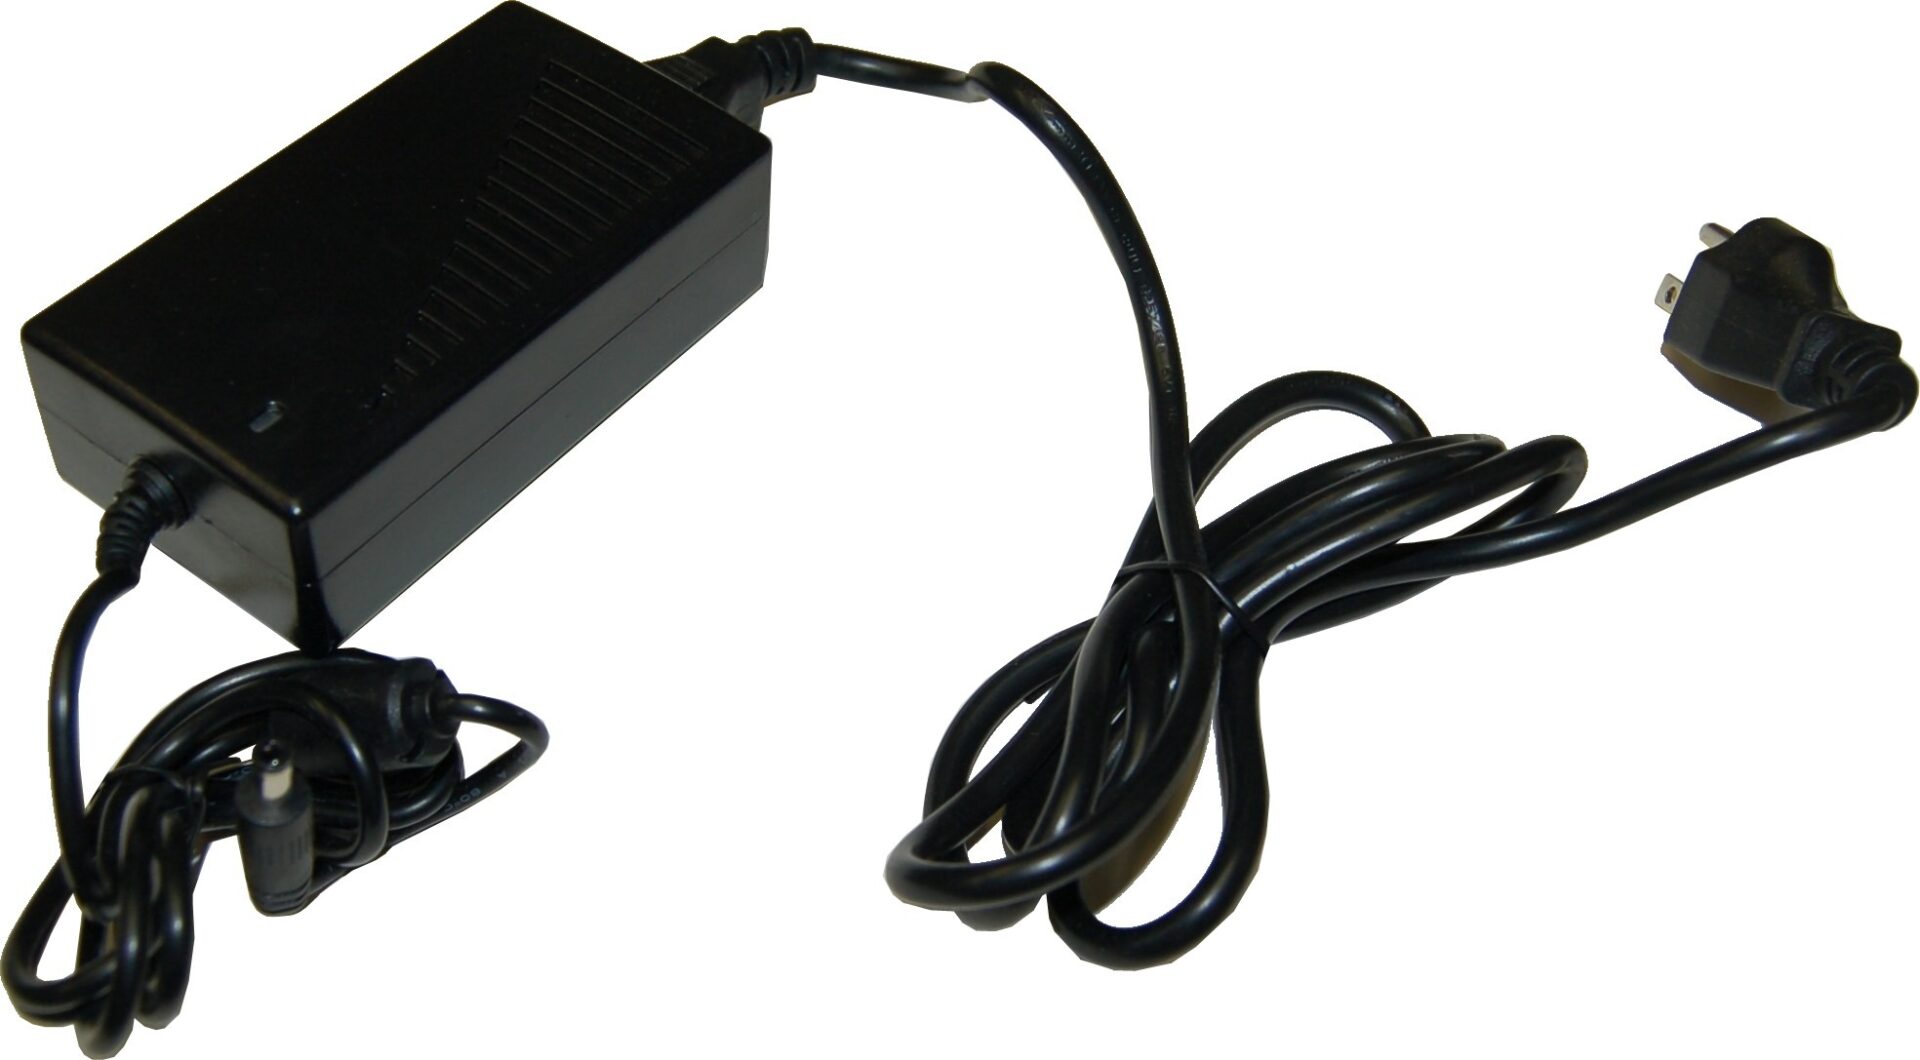 A black power cord is connected to the charger.